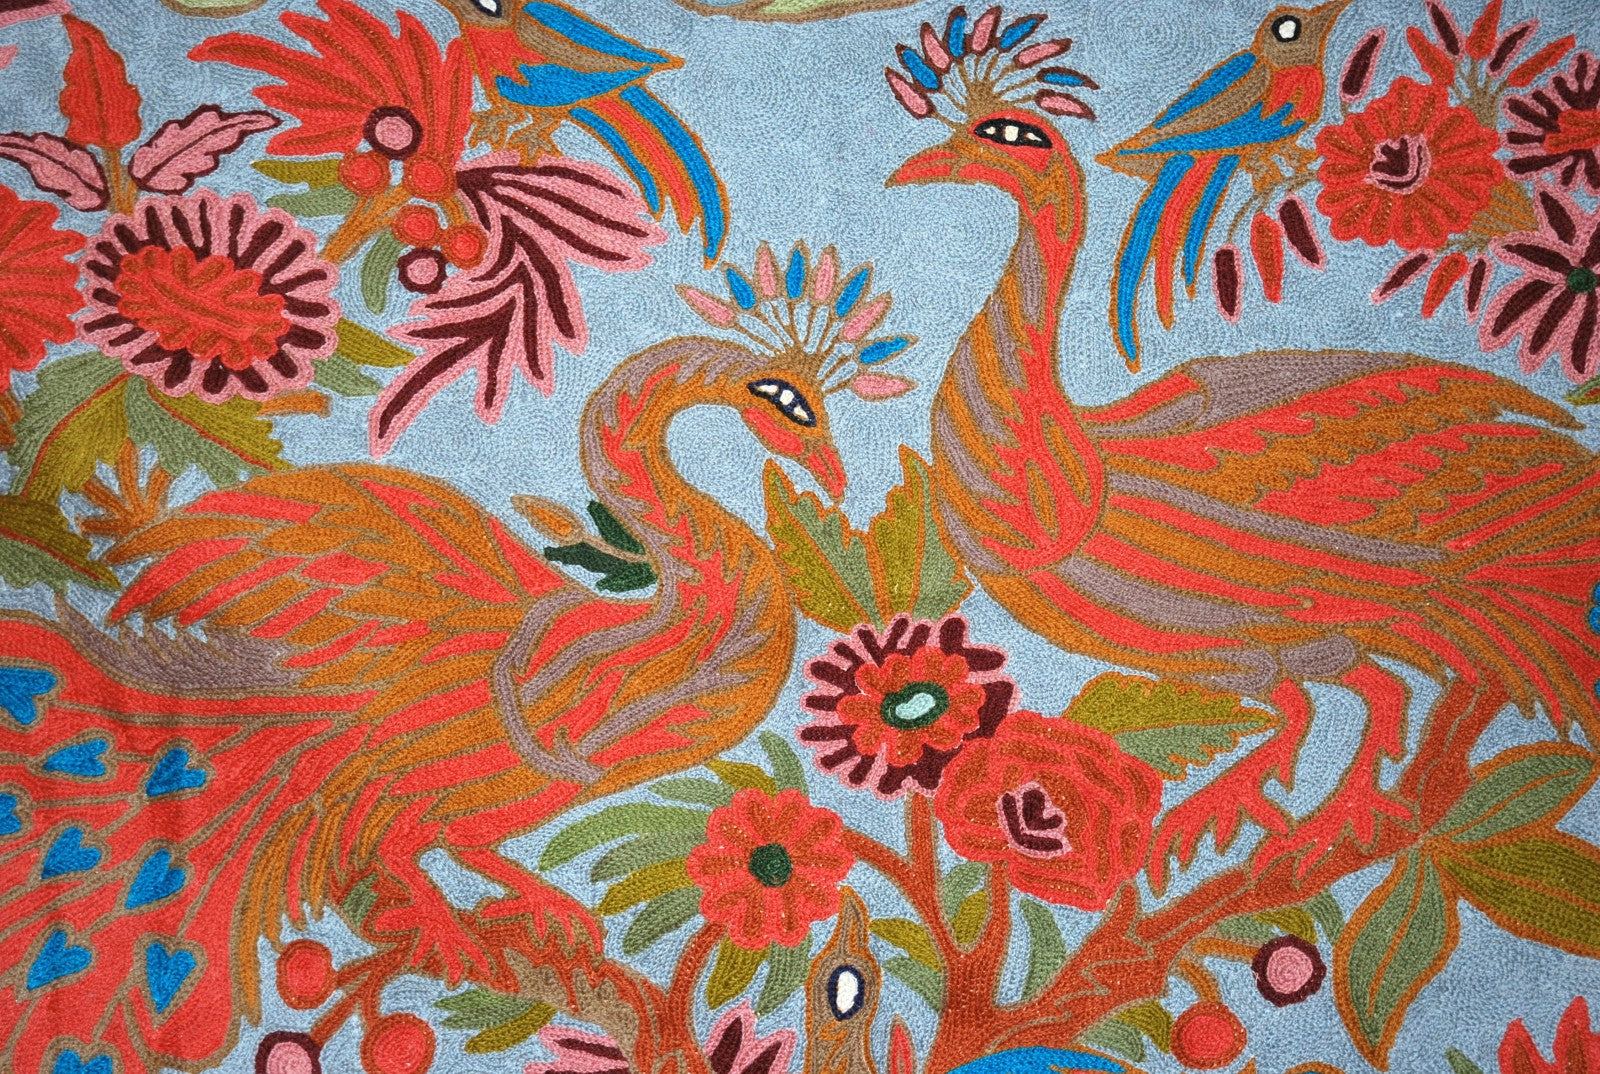 ChainStitch Tapestry Woolen Area Rug "Peacocks", Multicolor Embroidery 3x5 feet #CWR15117